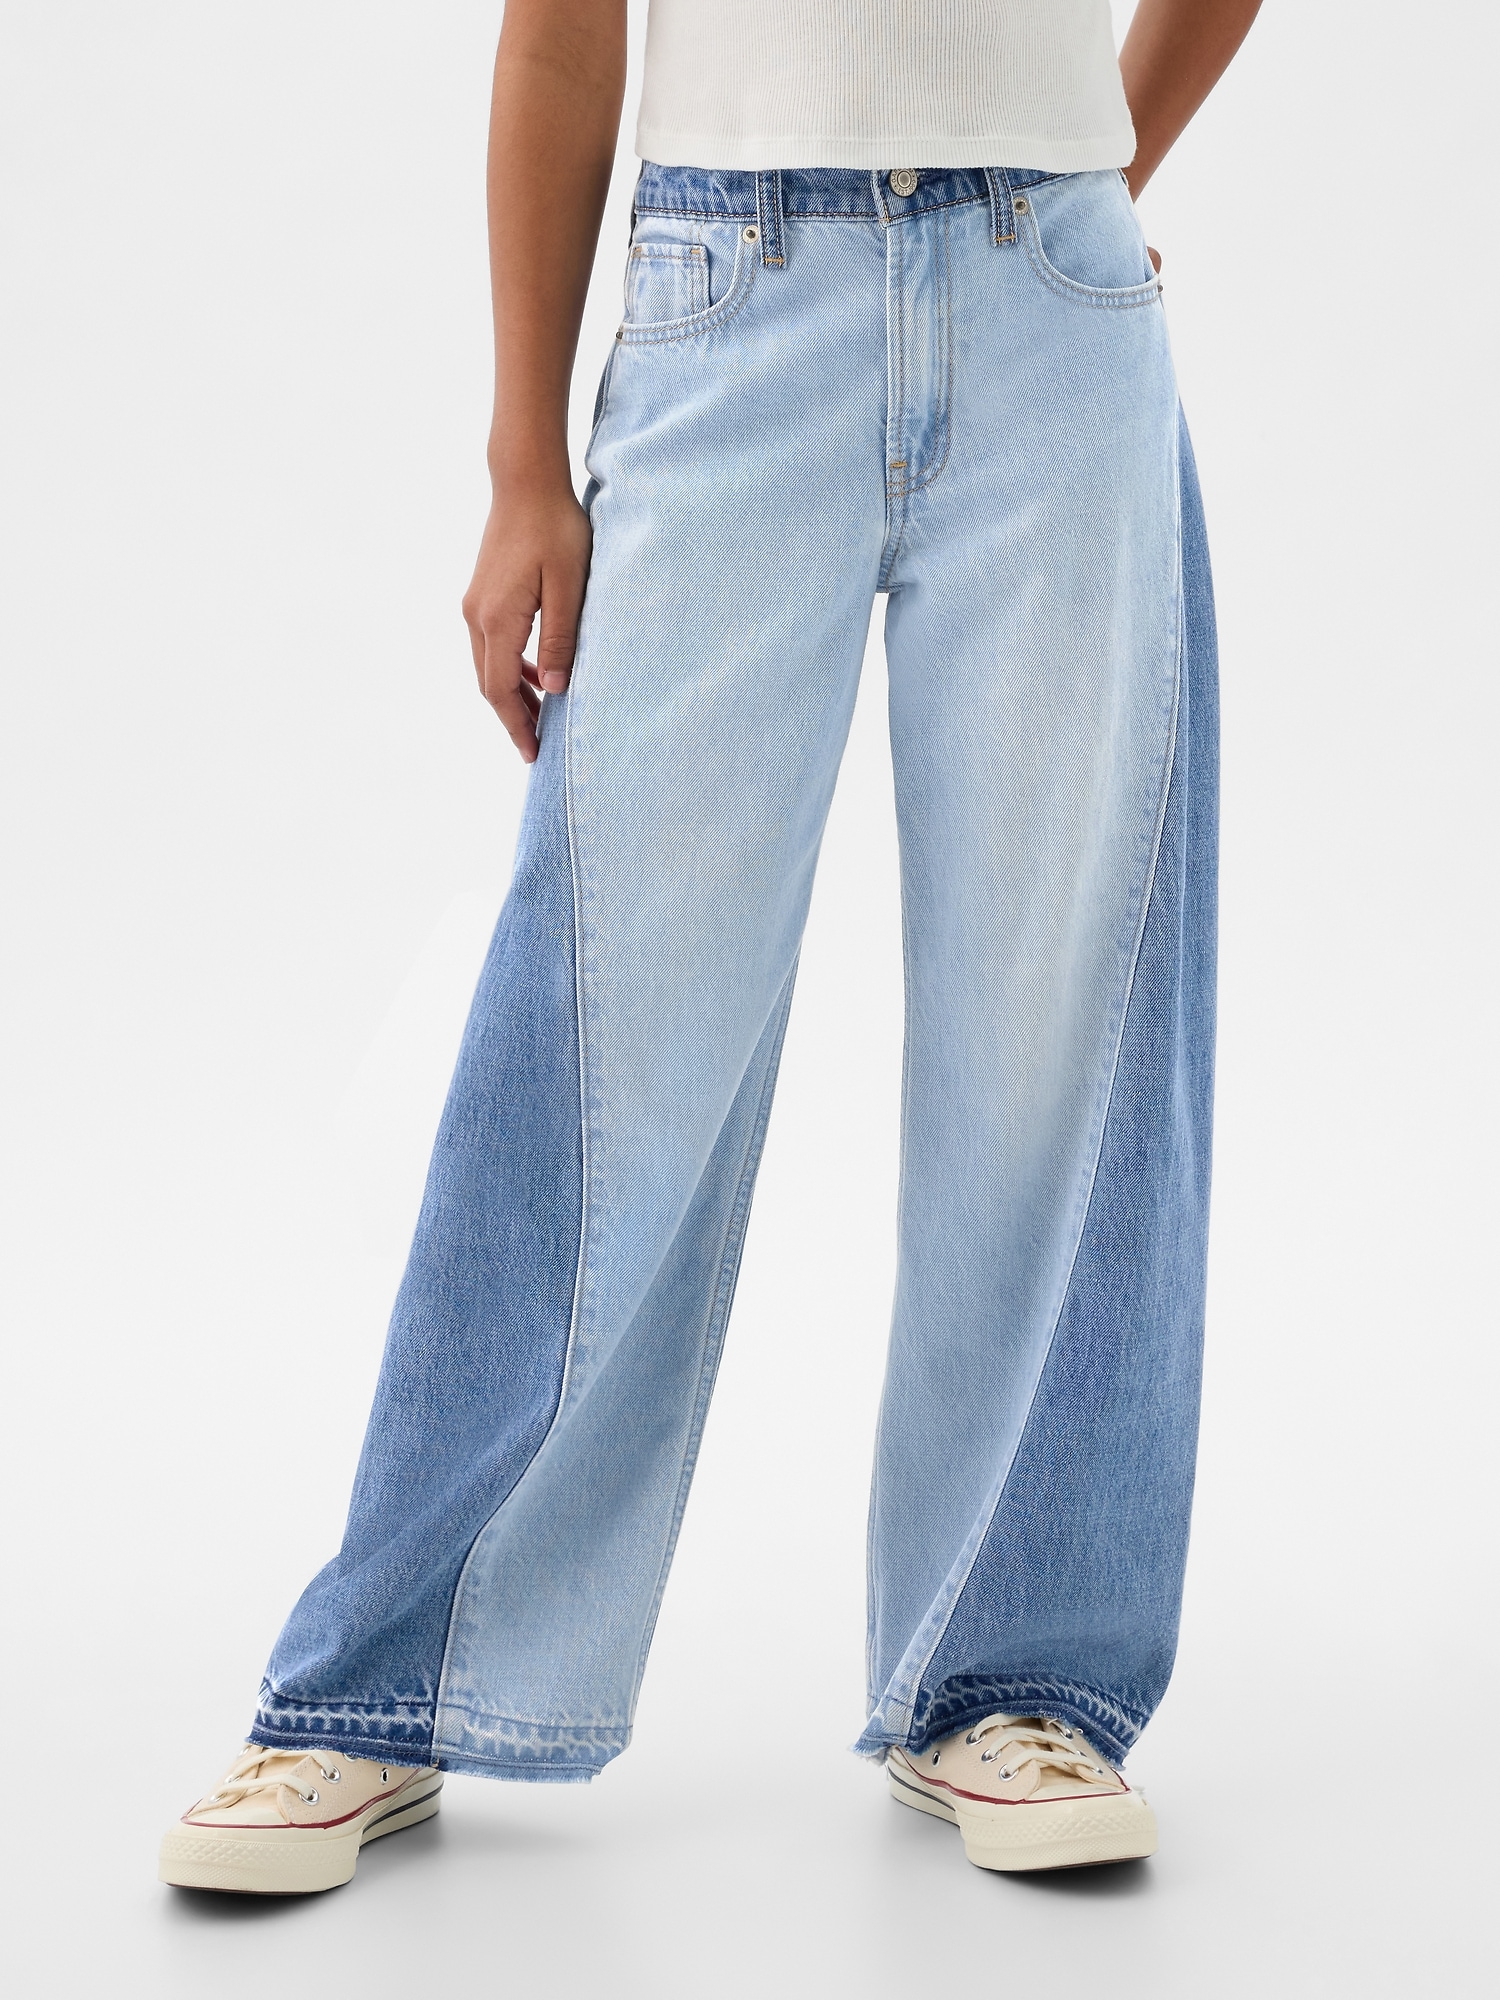 Kids Low Stride Relaxed Jeans